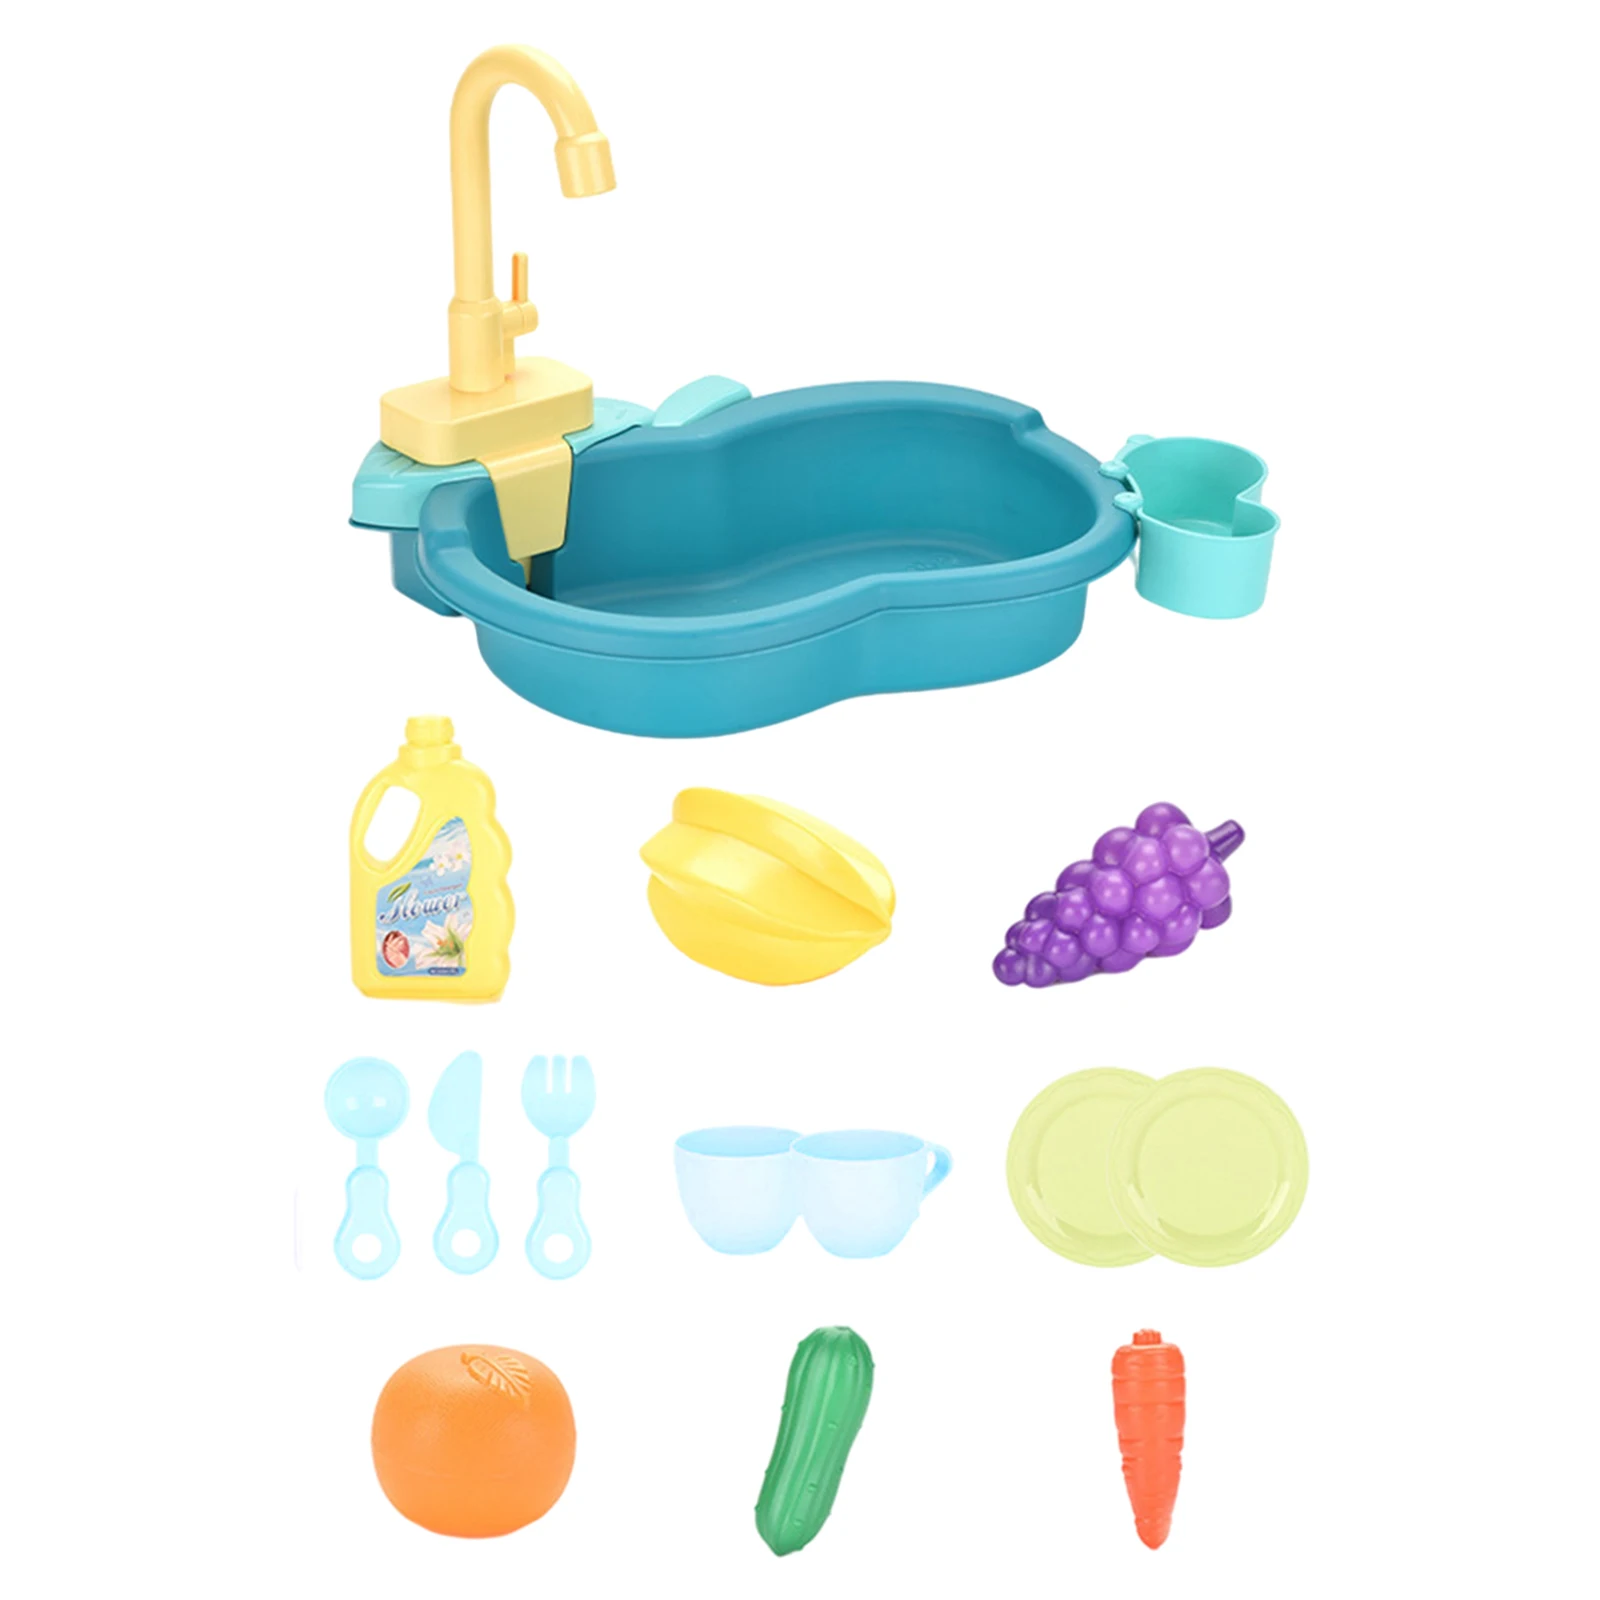 Simulated Play Sink Toys and Working Faucet Kitchenware Educational Role Playing Games for Kids Gifts